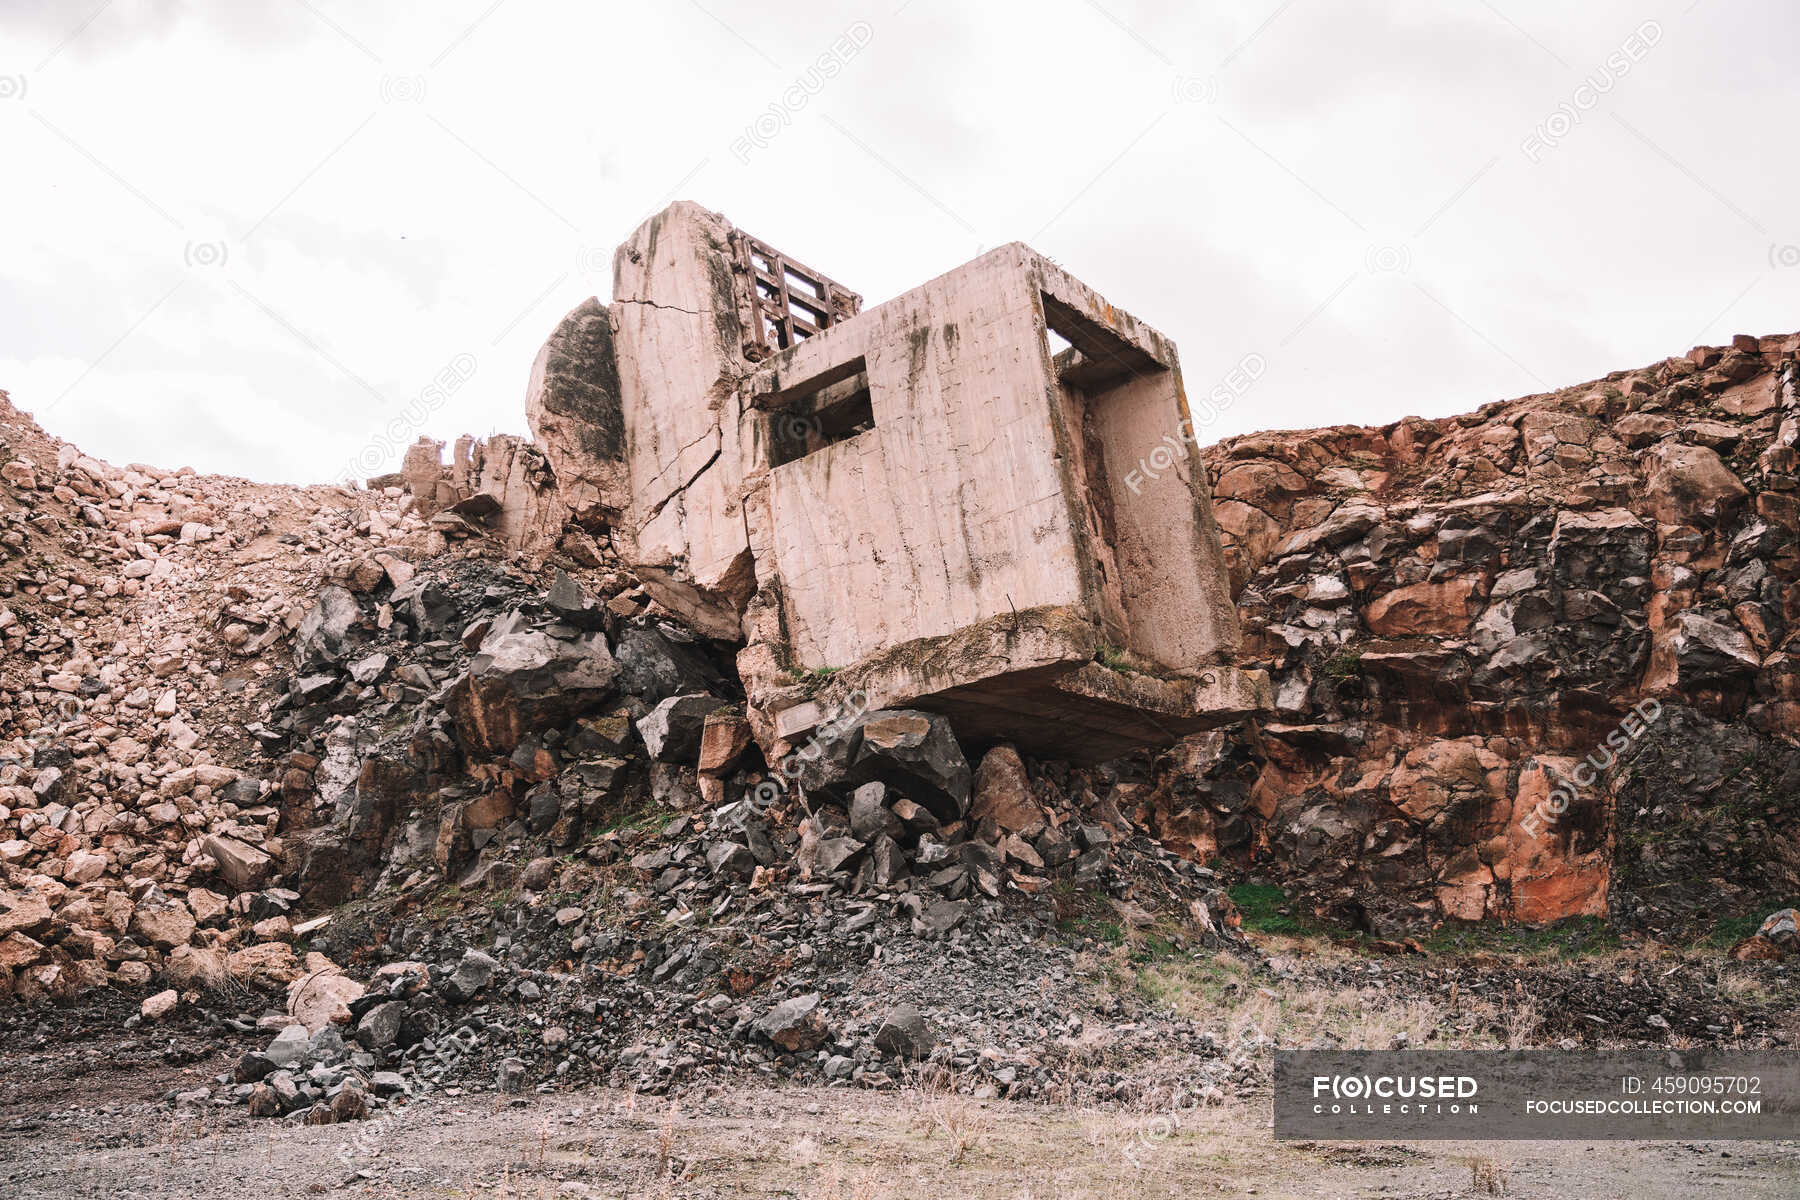 Piece Of Destroyed Cement Building On Open Pit With Rough Stones Under Cloudy Sky In Daylight